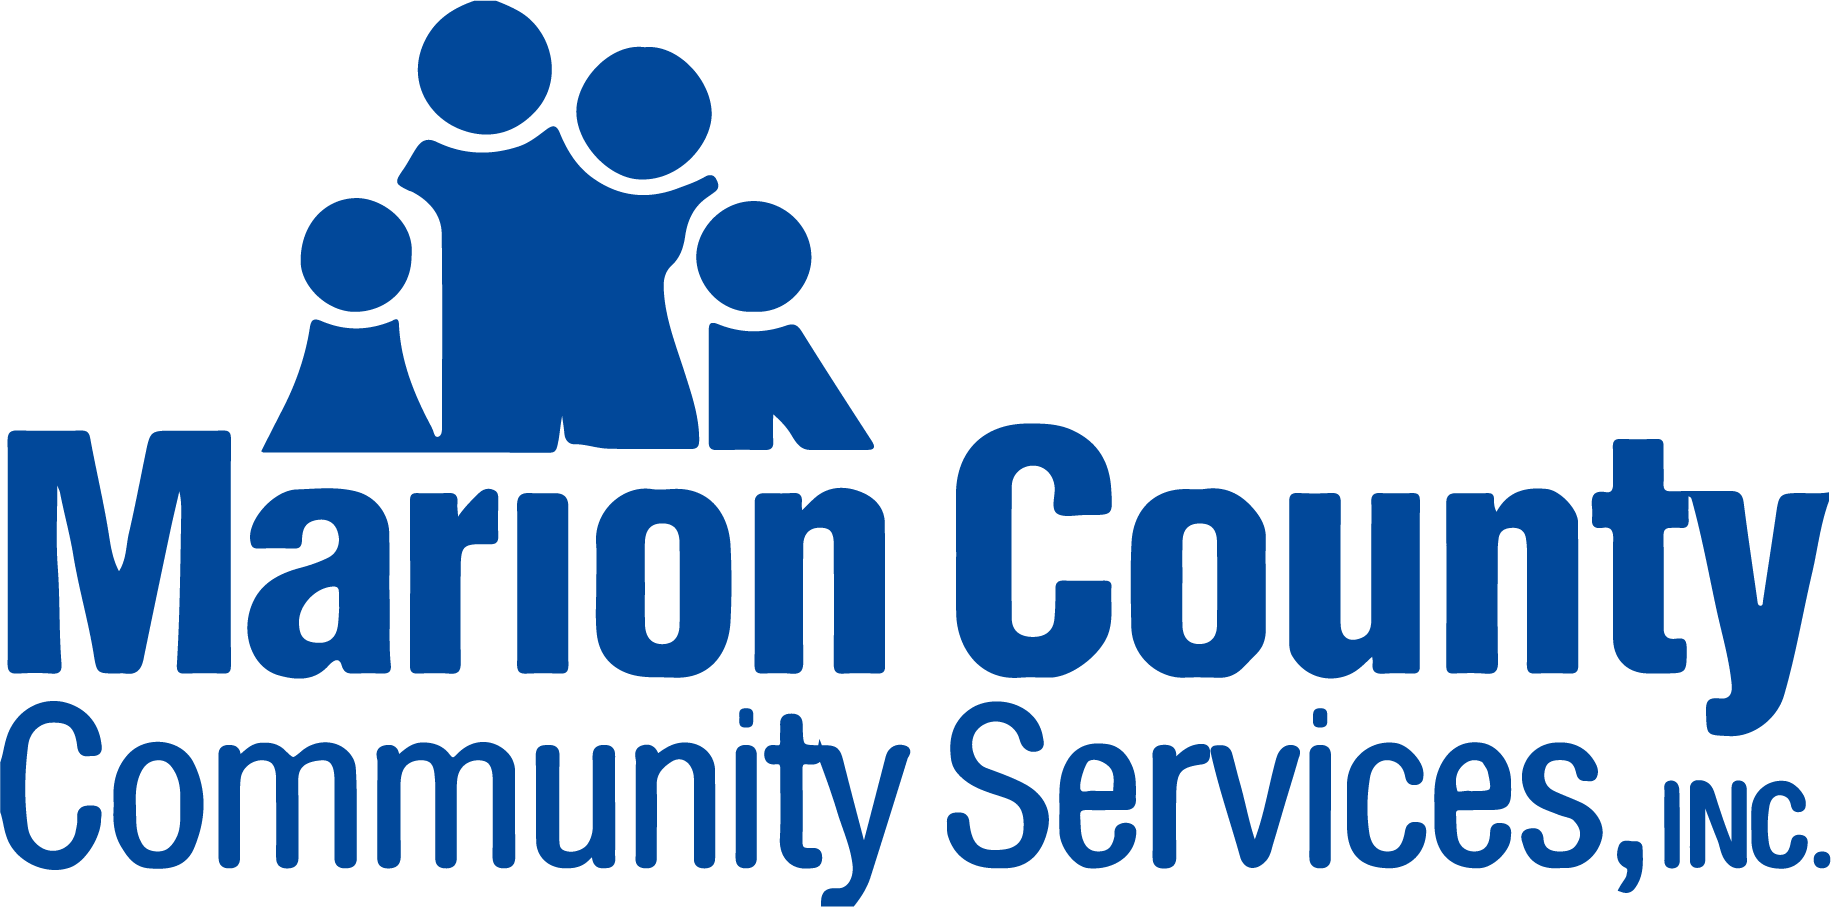 Marion County Community Services Arkansas logo and link to donation website